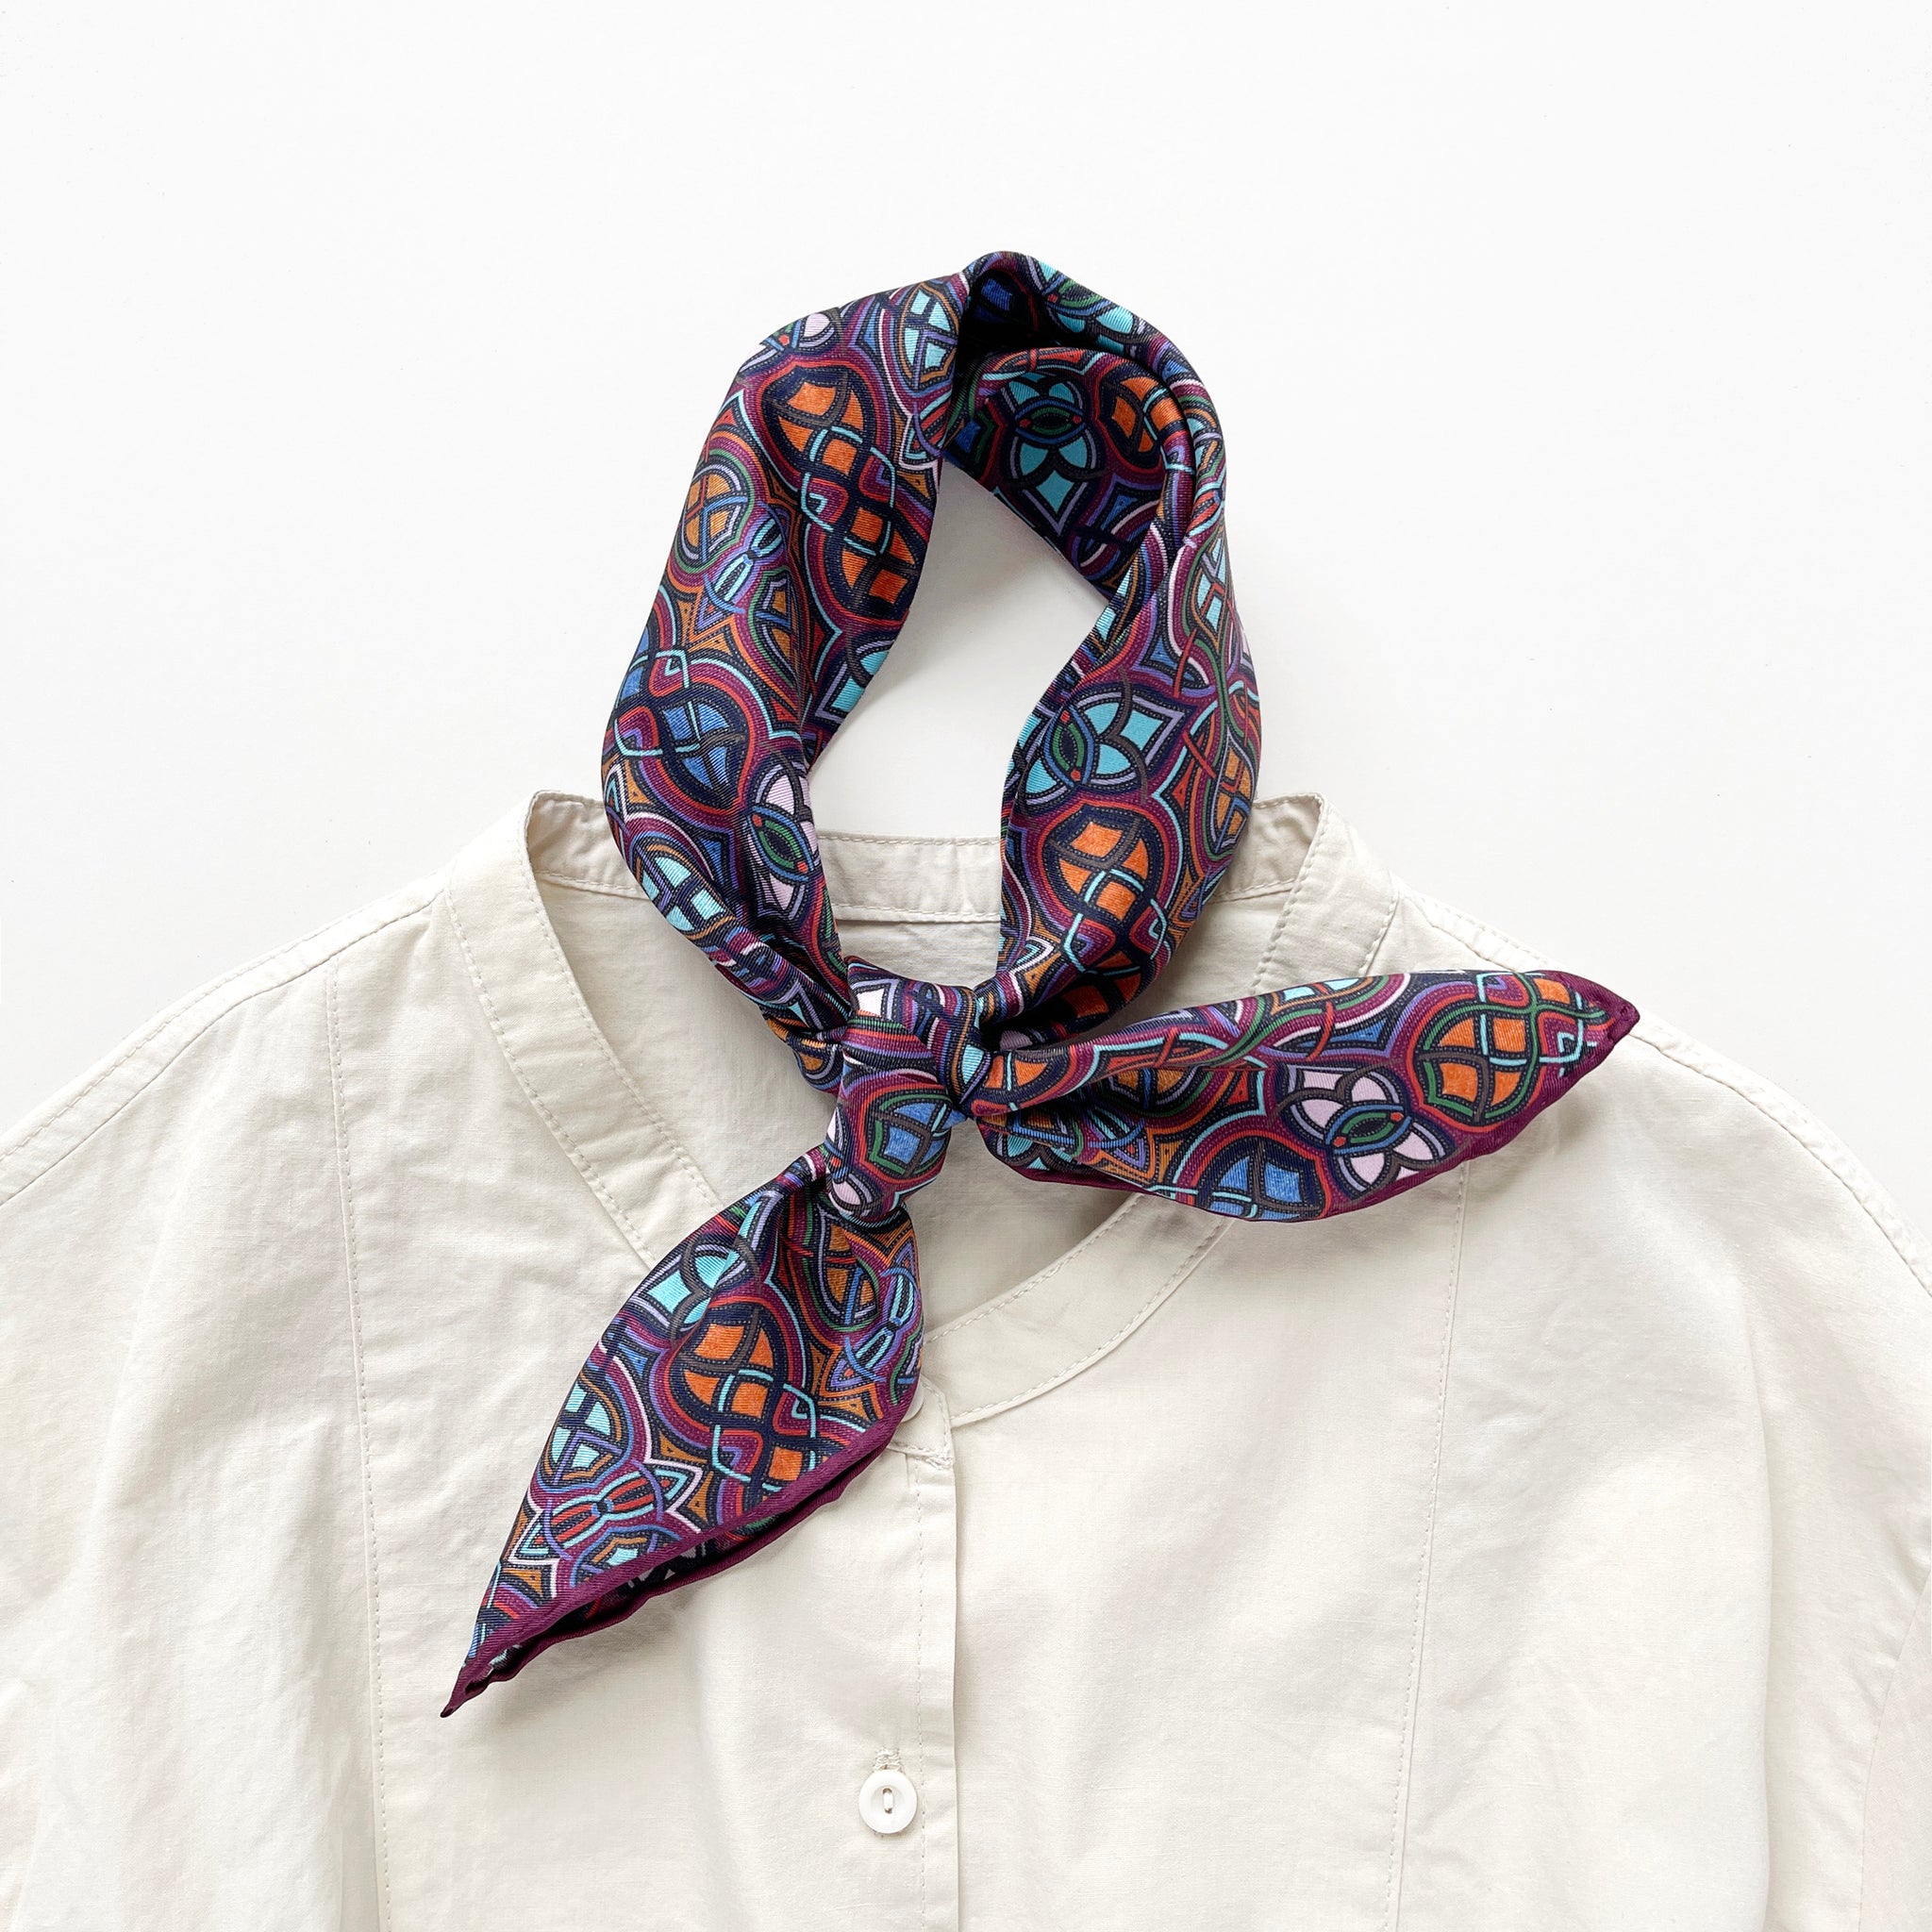 a small silk scarf neckerchief featuring an abstract intricate pattern in plum purple, blue and orange hues, knotted as a classic neckerchief, paired with a light beige unisex shirt